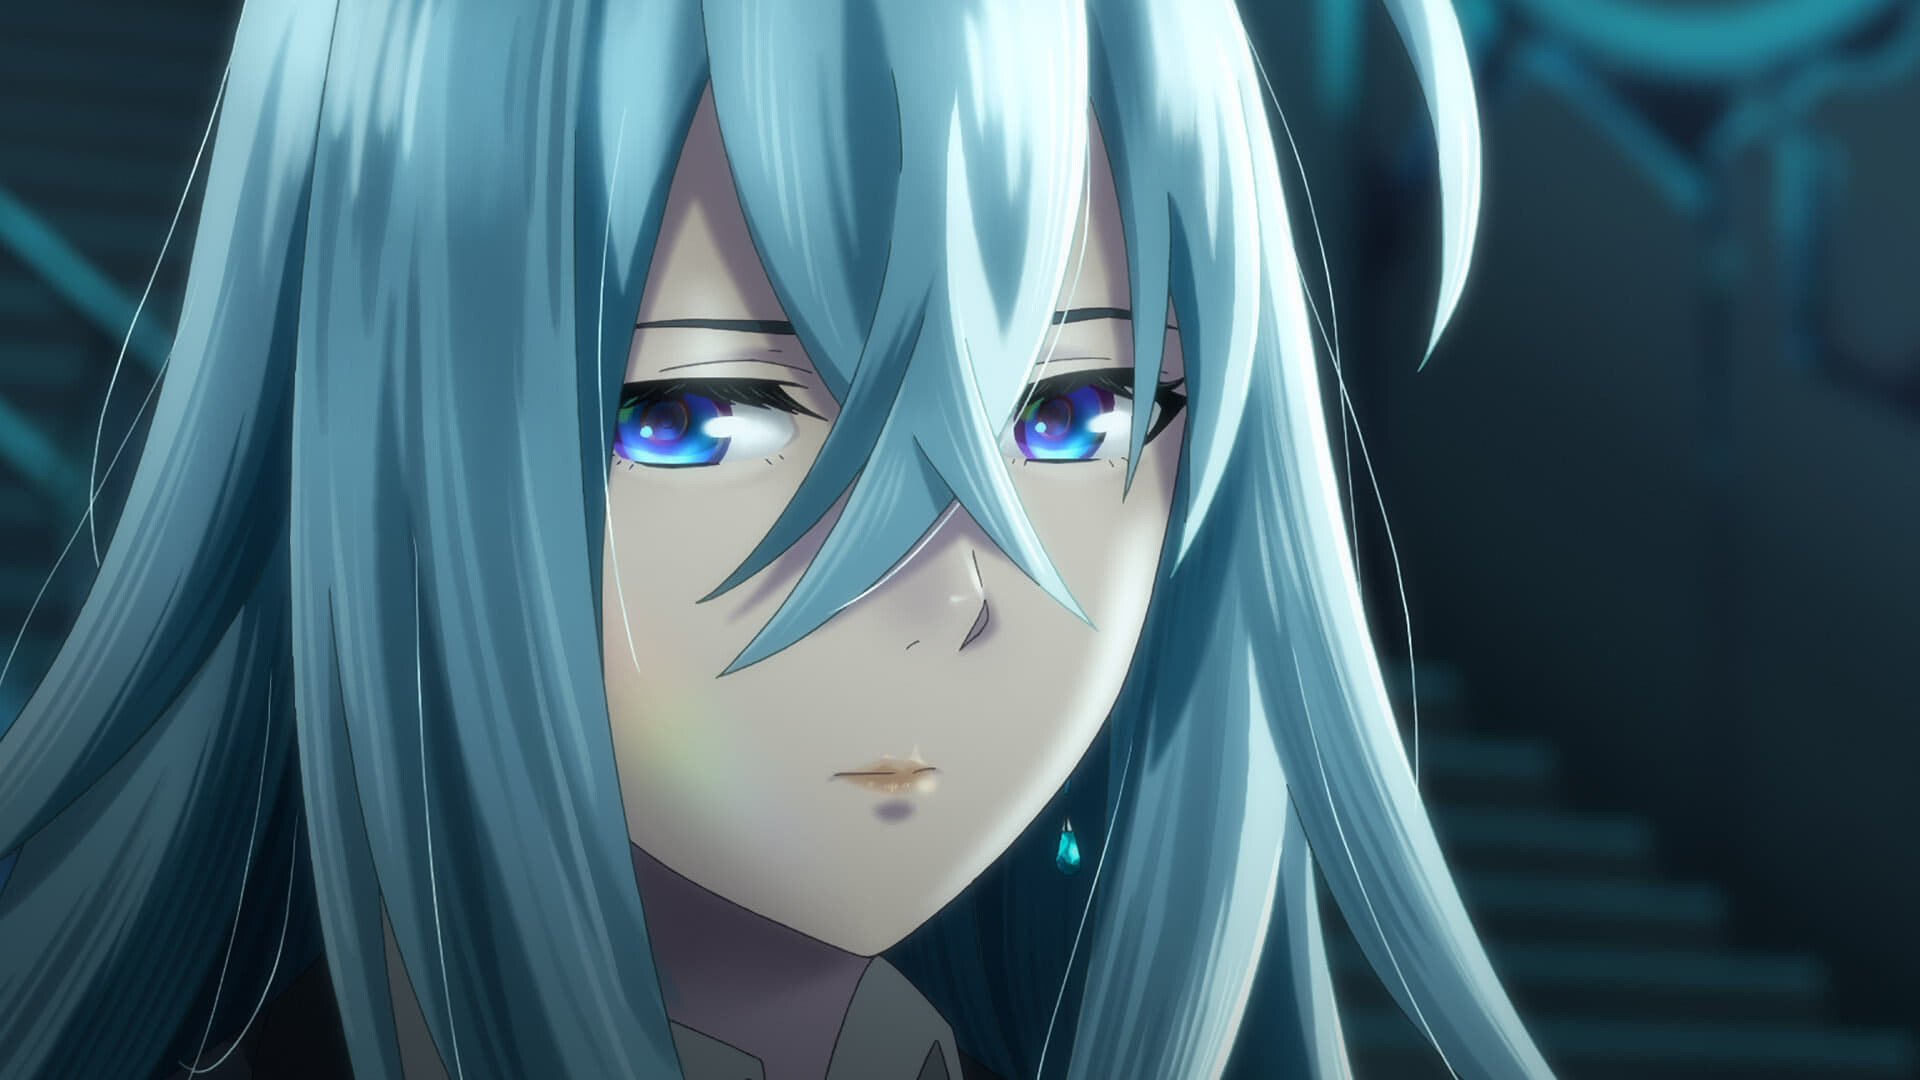 Vivy: Fluorite Eye's Song: The one hundred-year journey of an AI songstress. 1920x1080 Full HD Background.